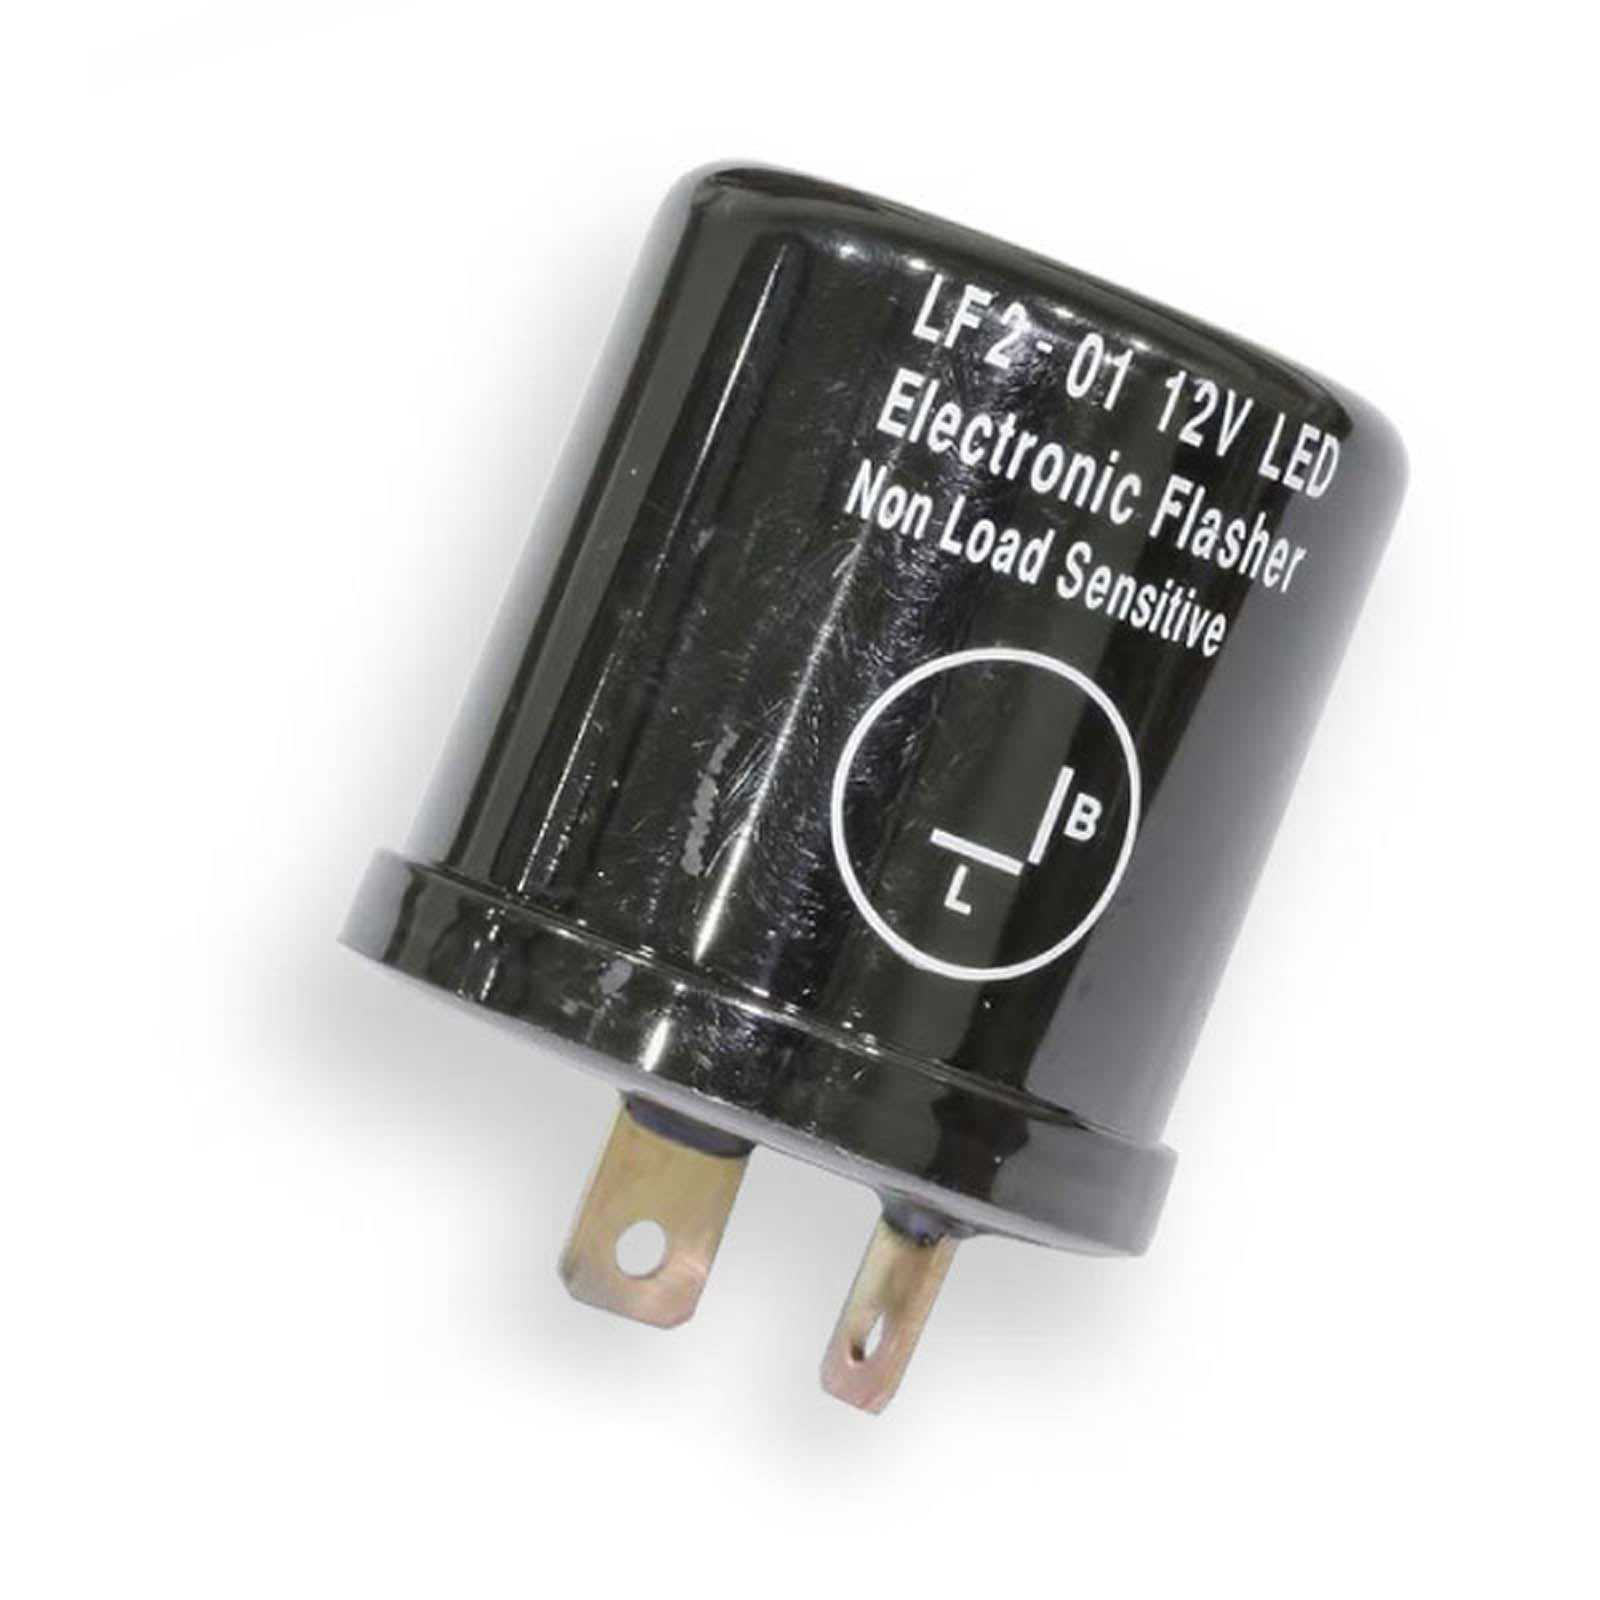 Whites Motorcycle Parts, WHITES FLASHER RELAY LED UNIVERSAL 12 Volt 2 pin CAN Style